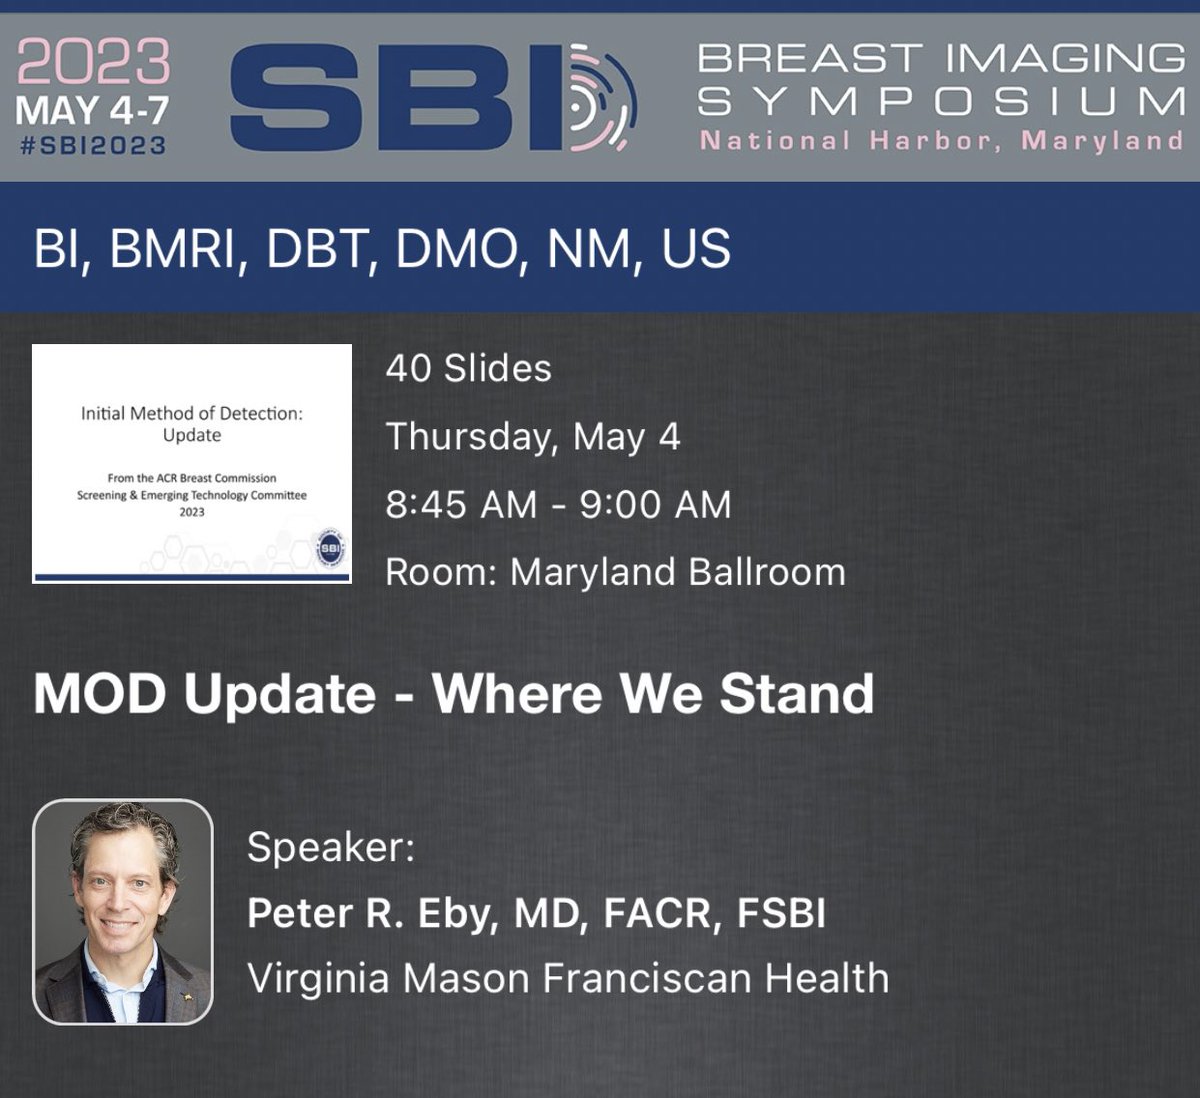 Let’s get on this @BreastImaging! Dr Peter Eby gave compelling reasons why we should be documenting method of detection (MOD) for #breastcancer #sbi2023